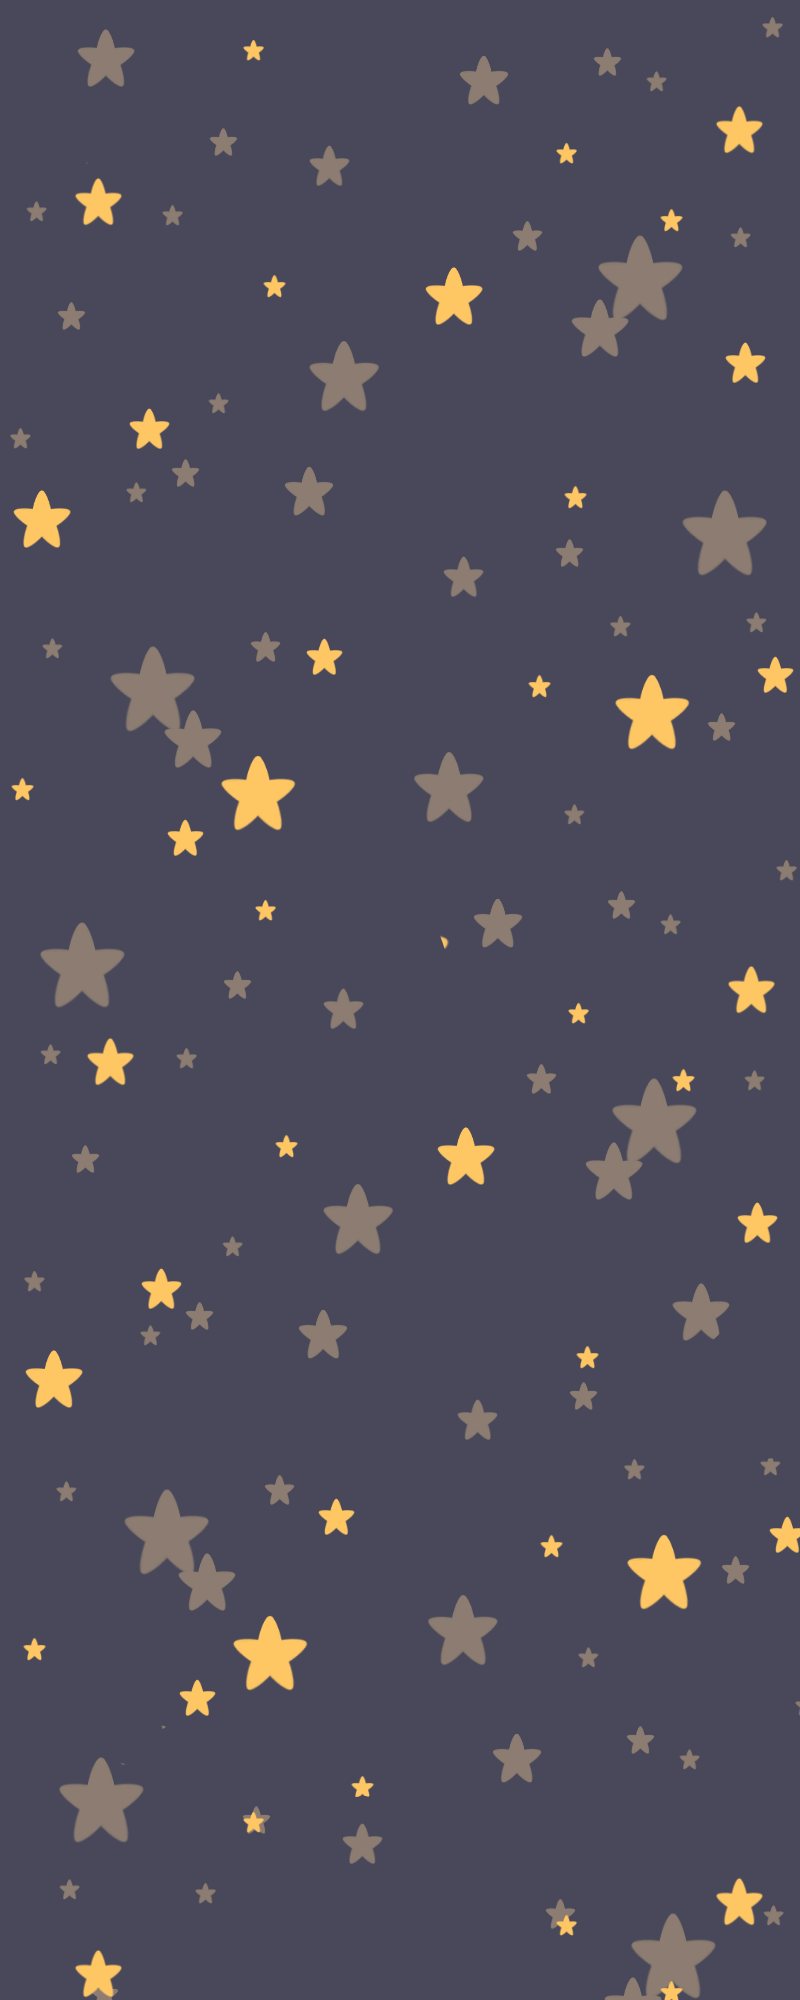 Aesthetic Yellow Background With Stars Largest Wallpaper Portal